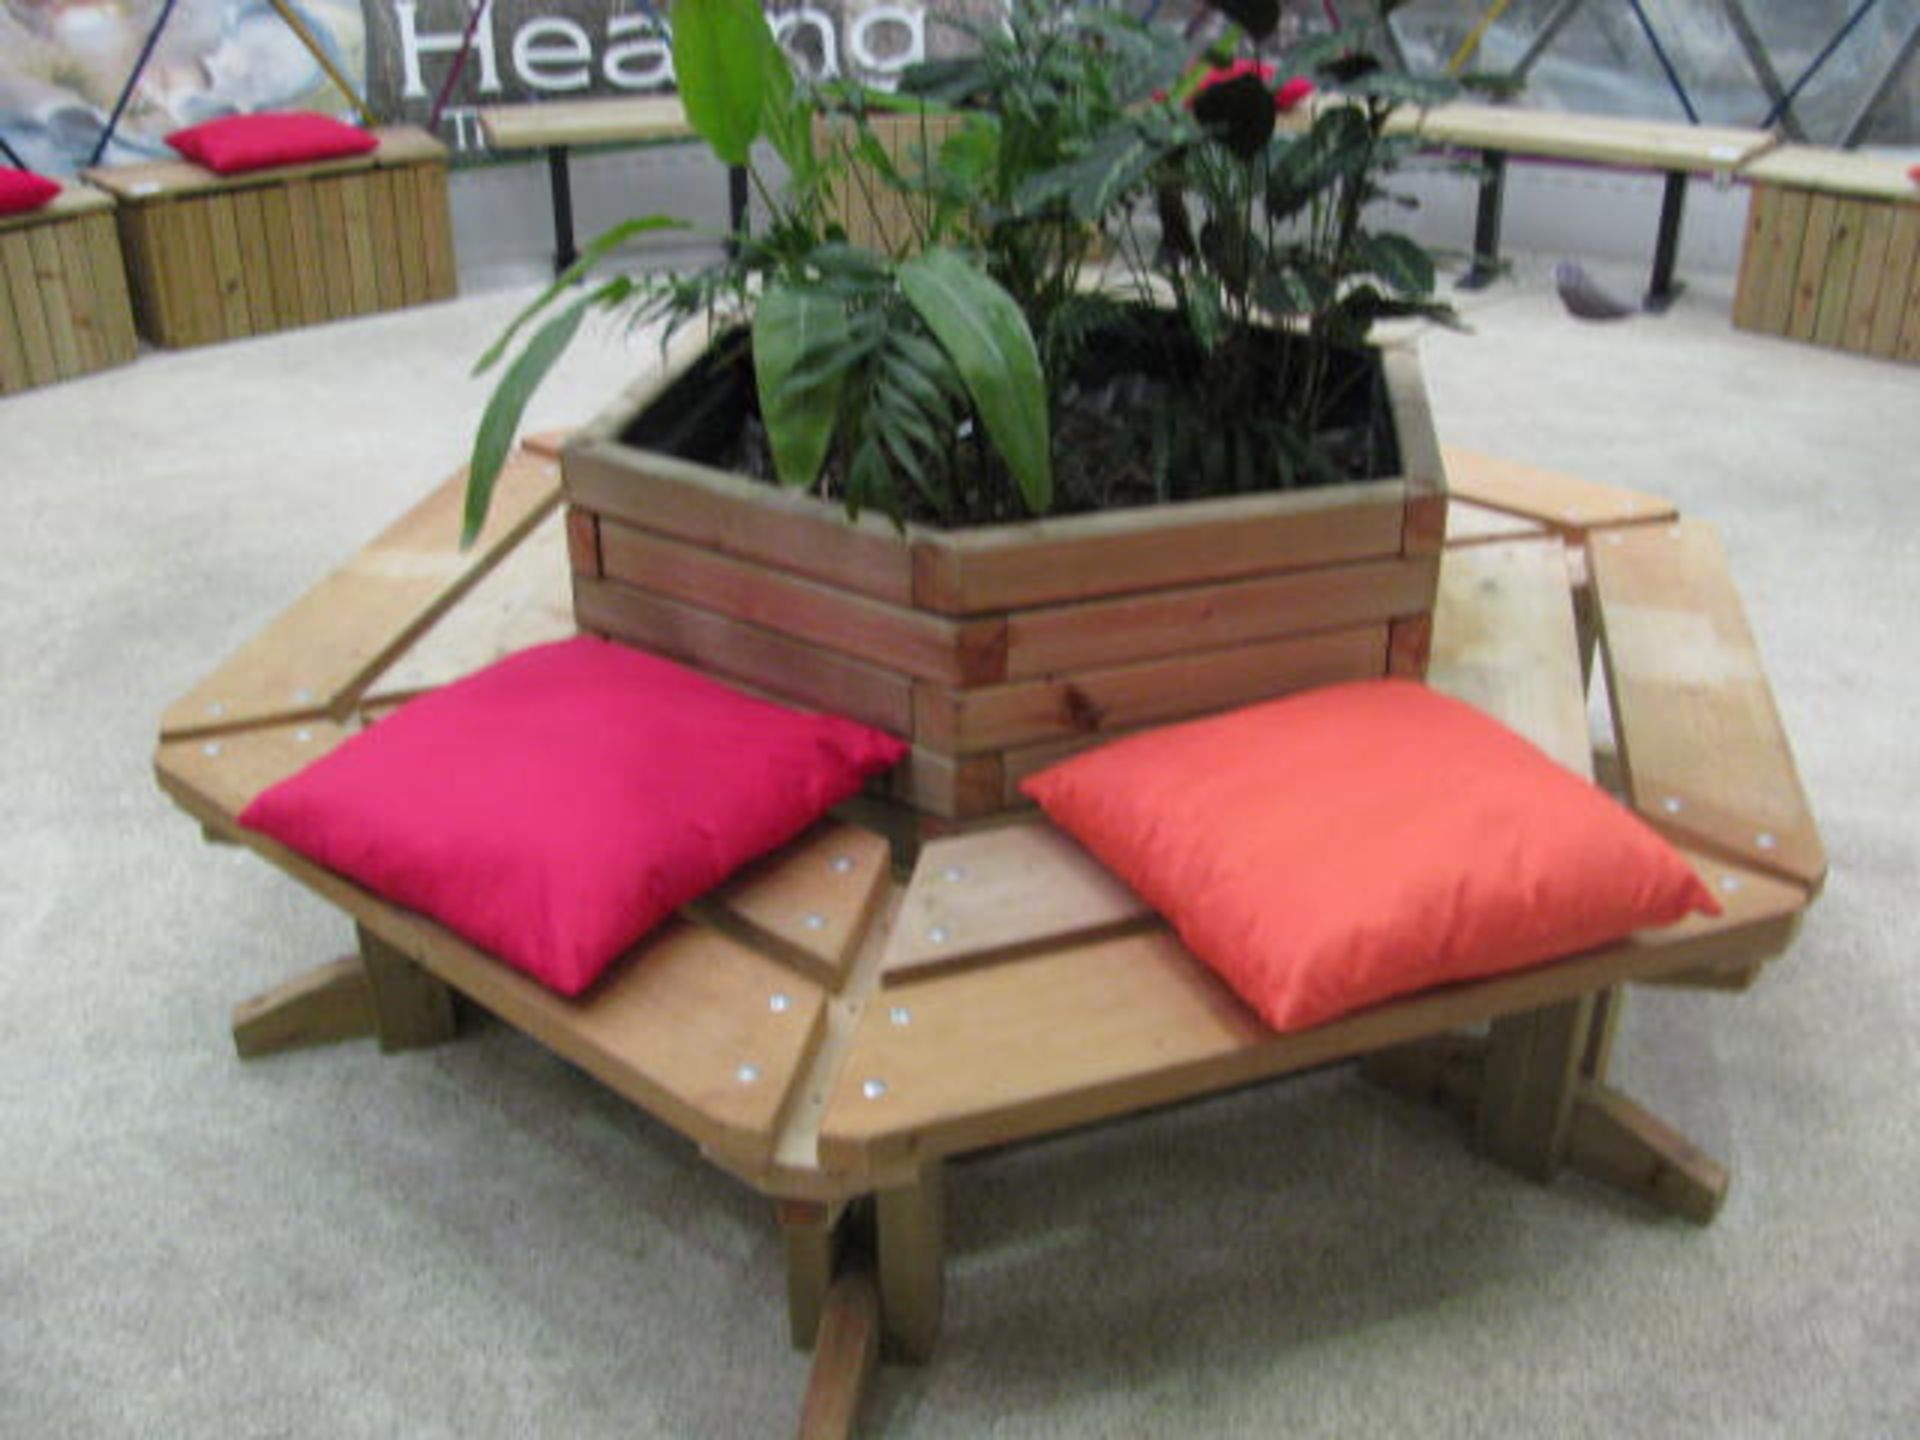 Planter and bench surround - Image 3 of 3